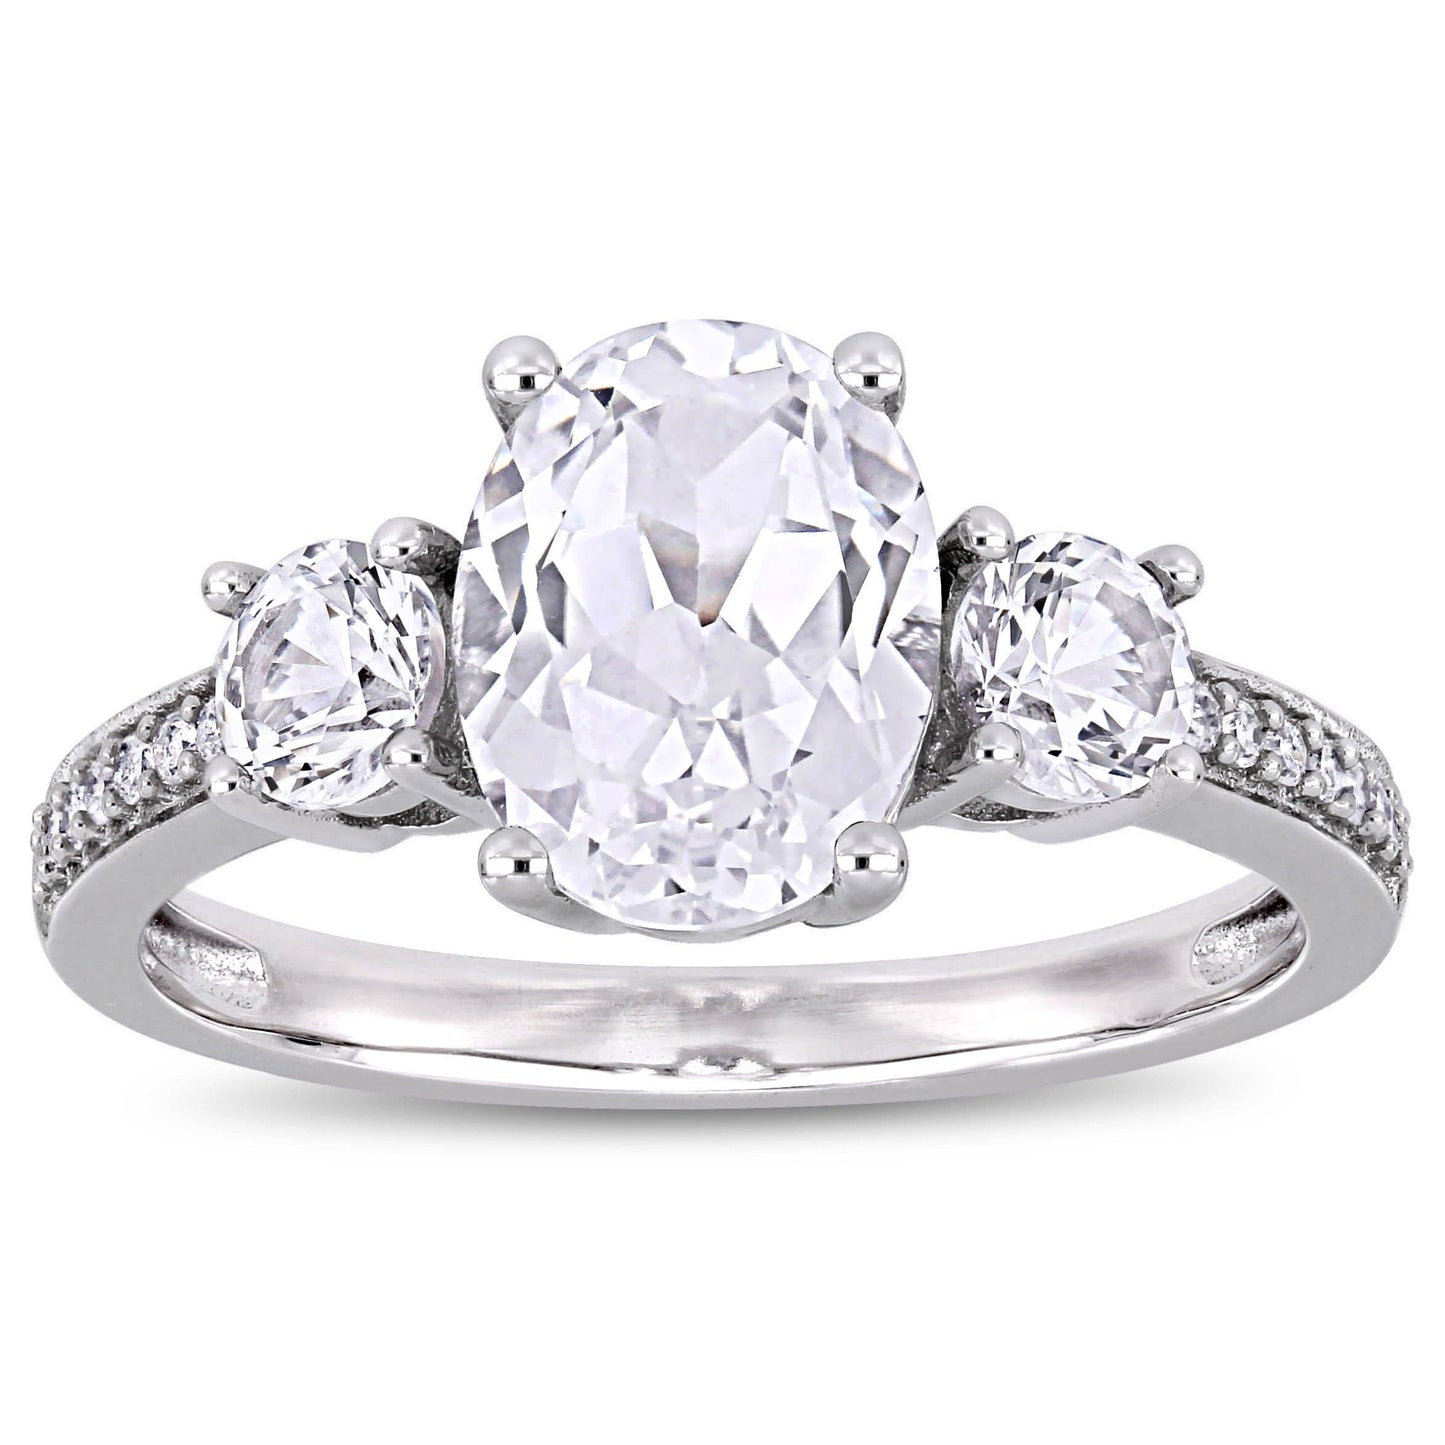 Julie Leah 3-Stone Oval White Sapphire & Diamond Ring in 10k White Gold